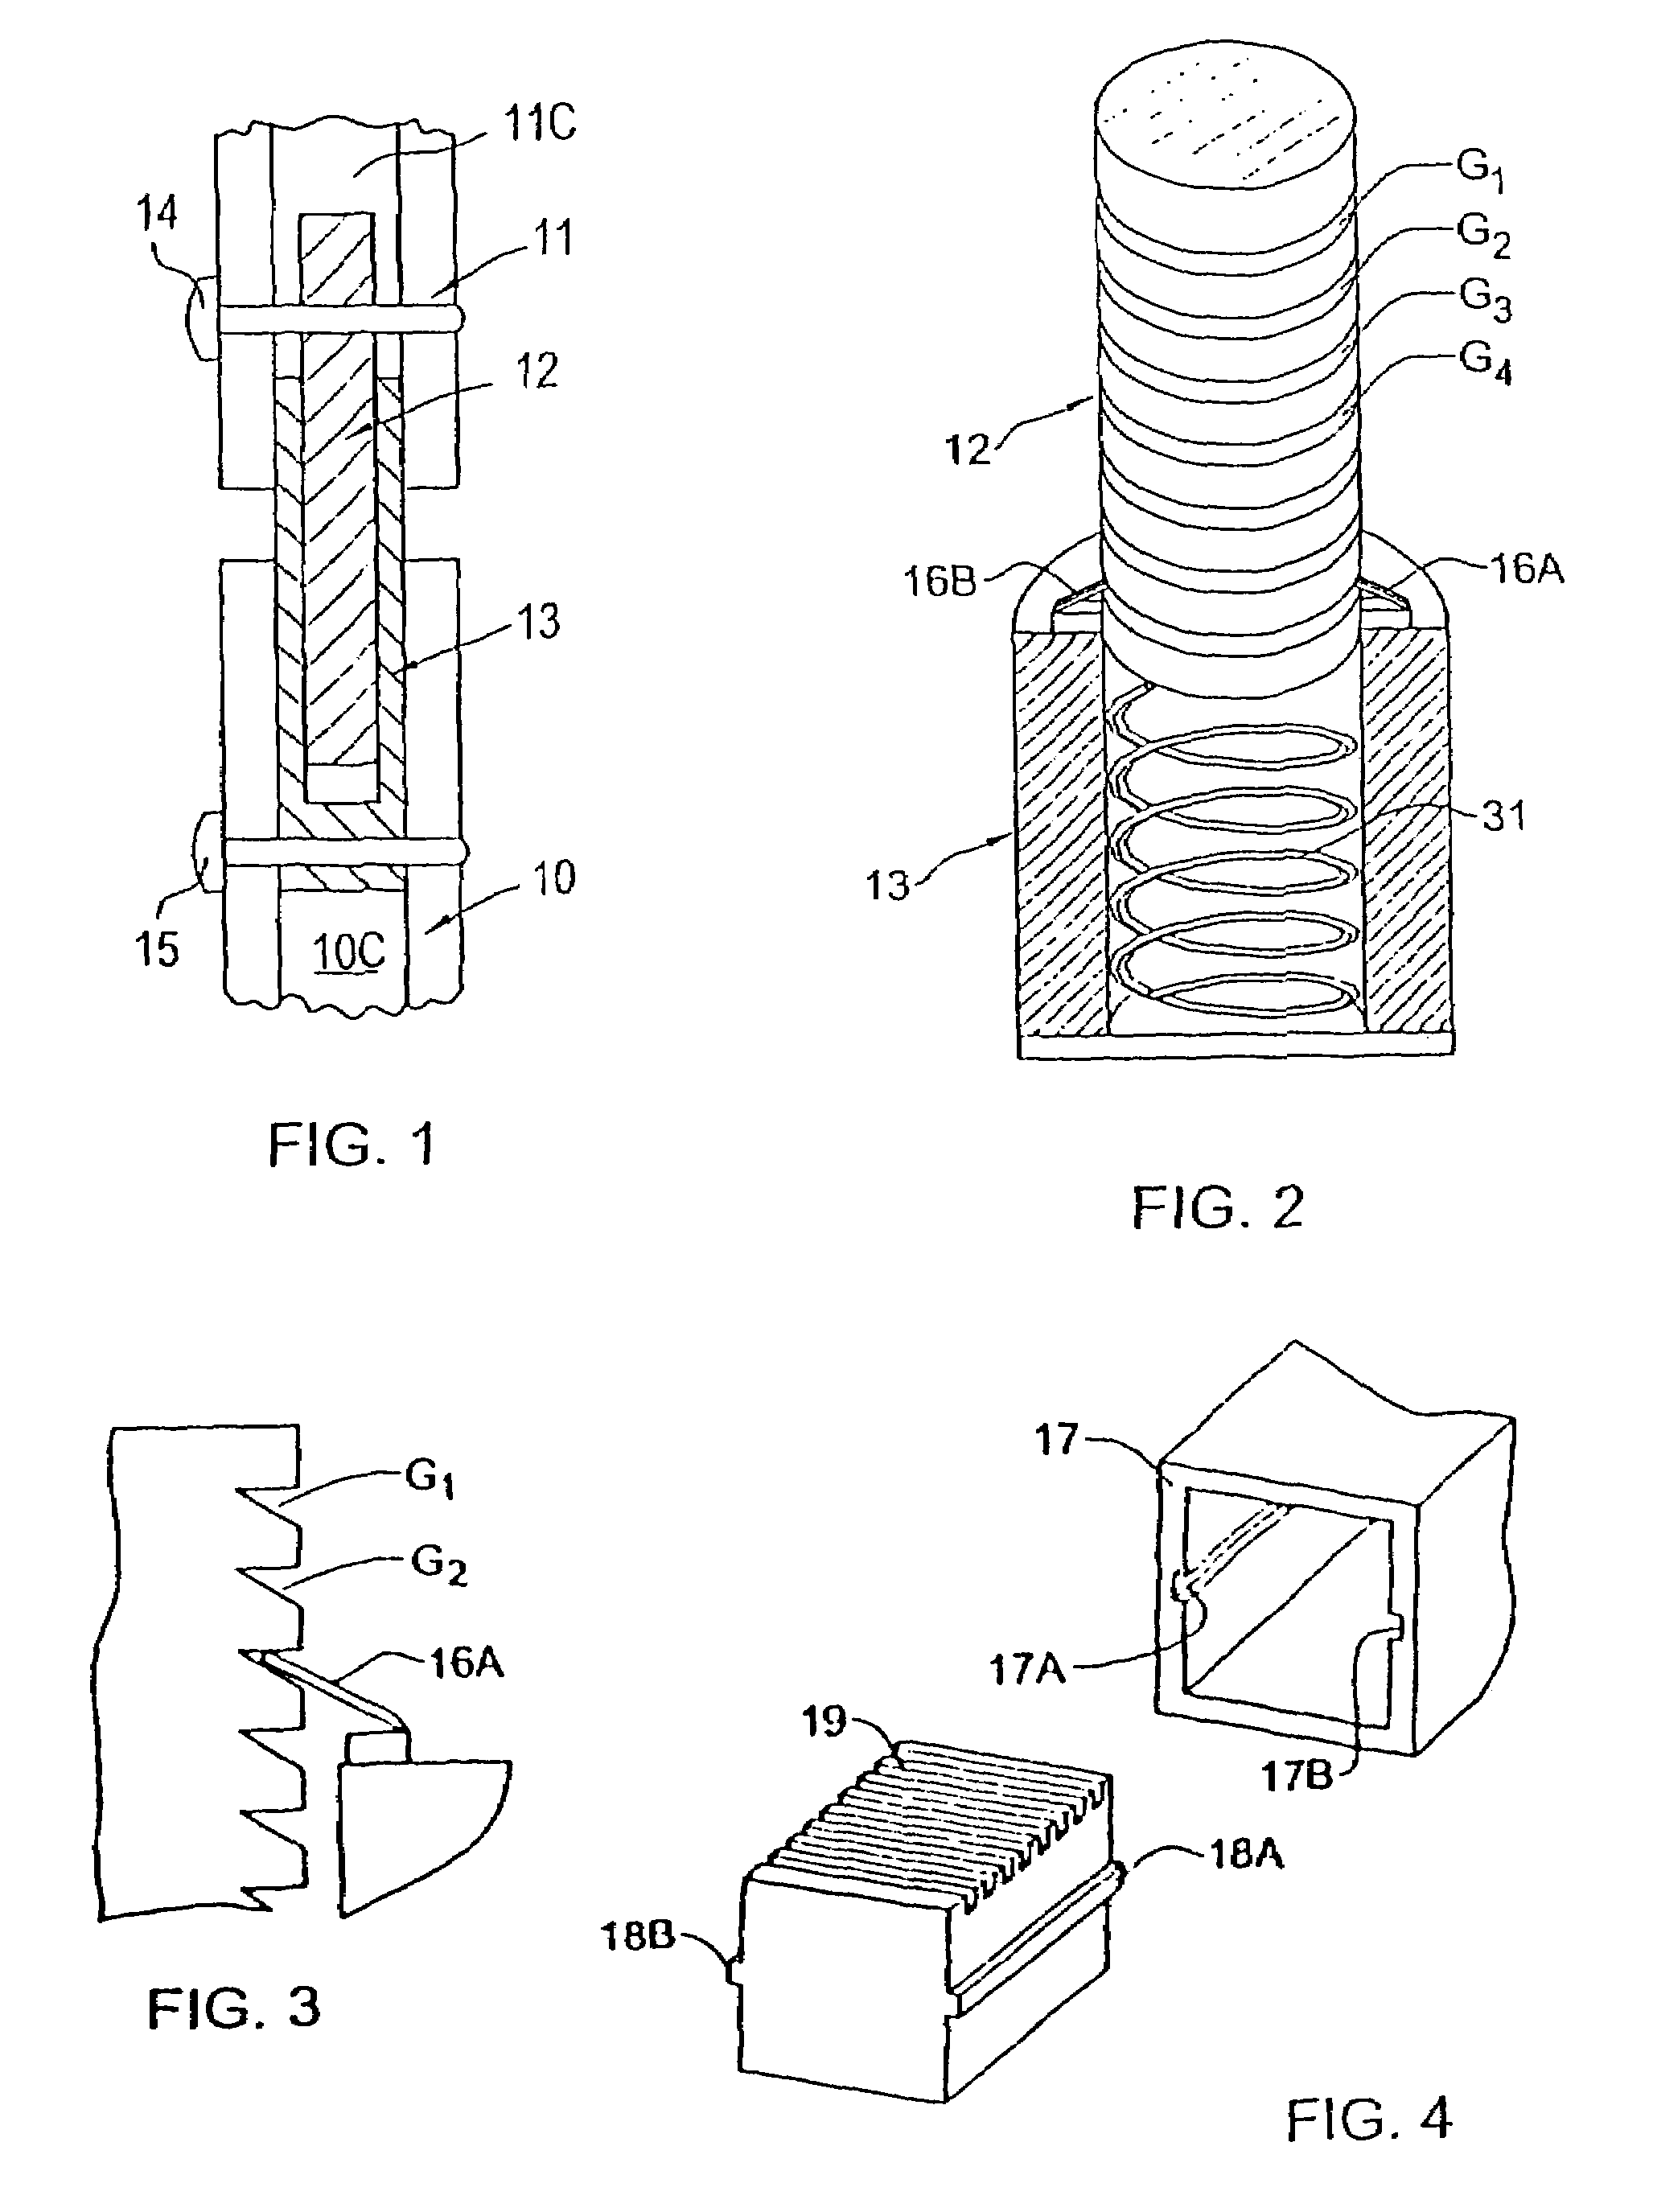 Magnetically-actuable intramedullary device